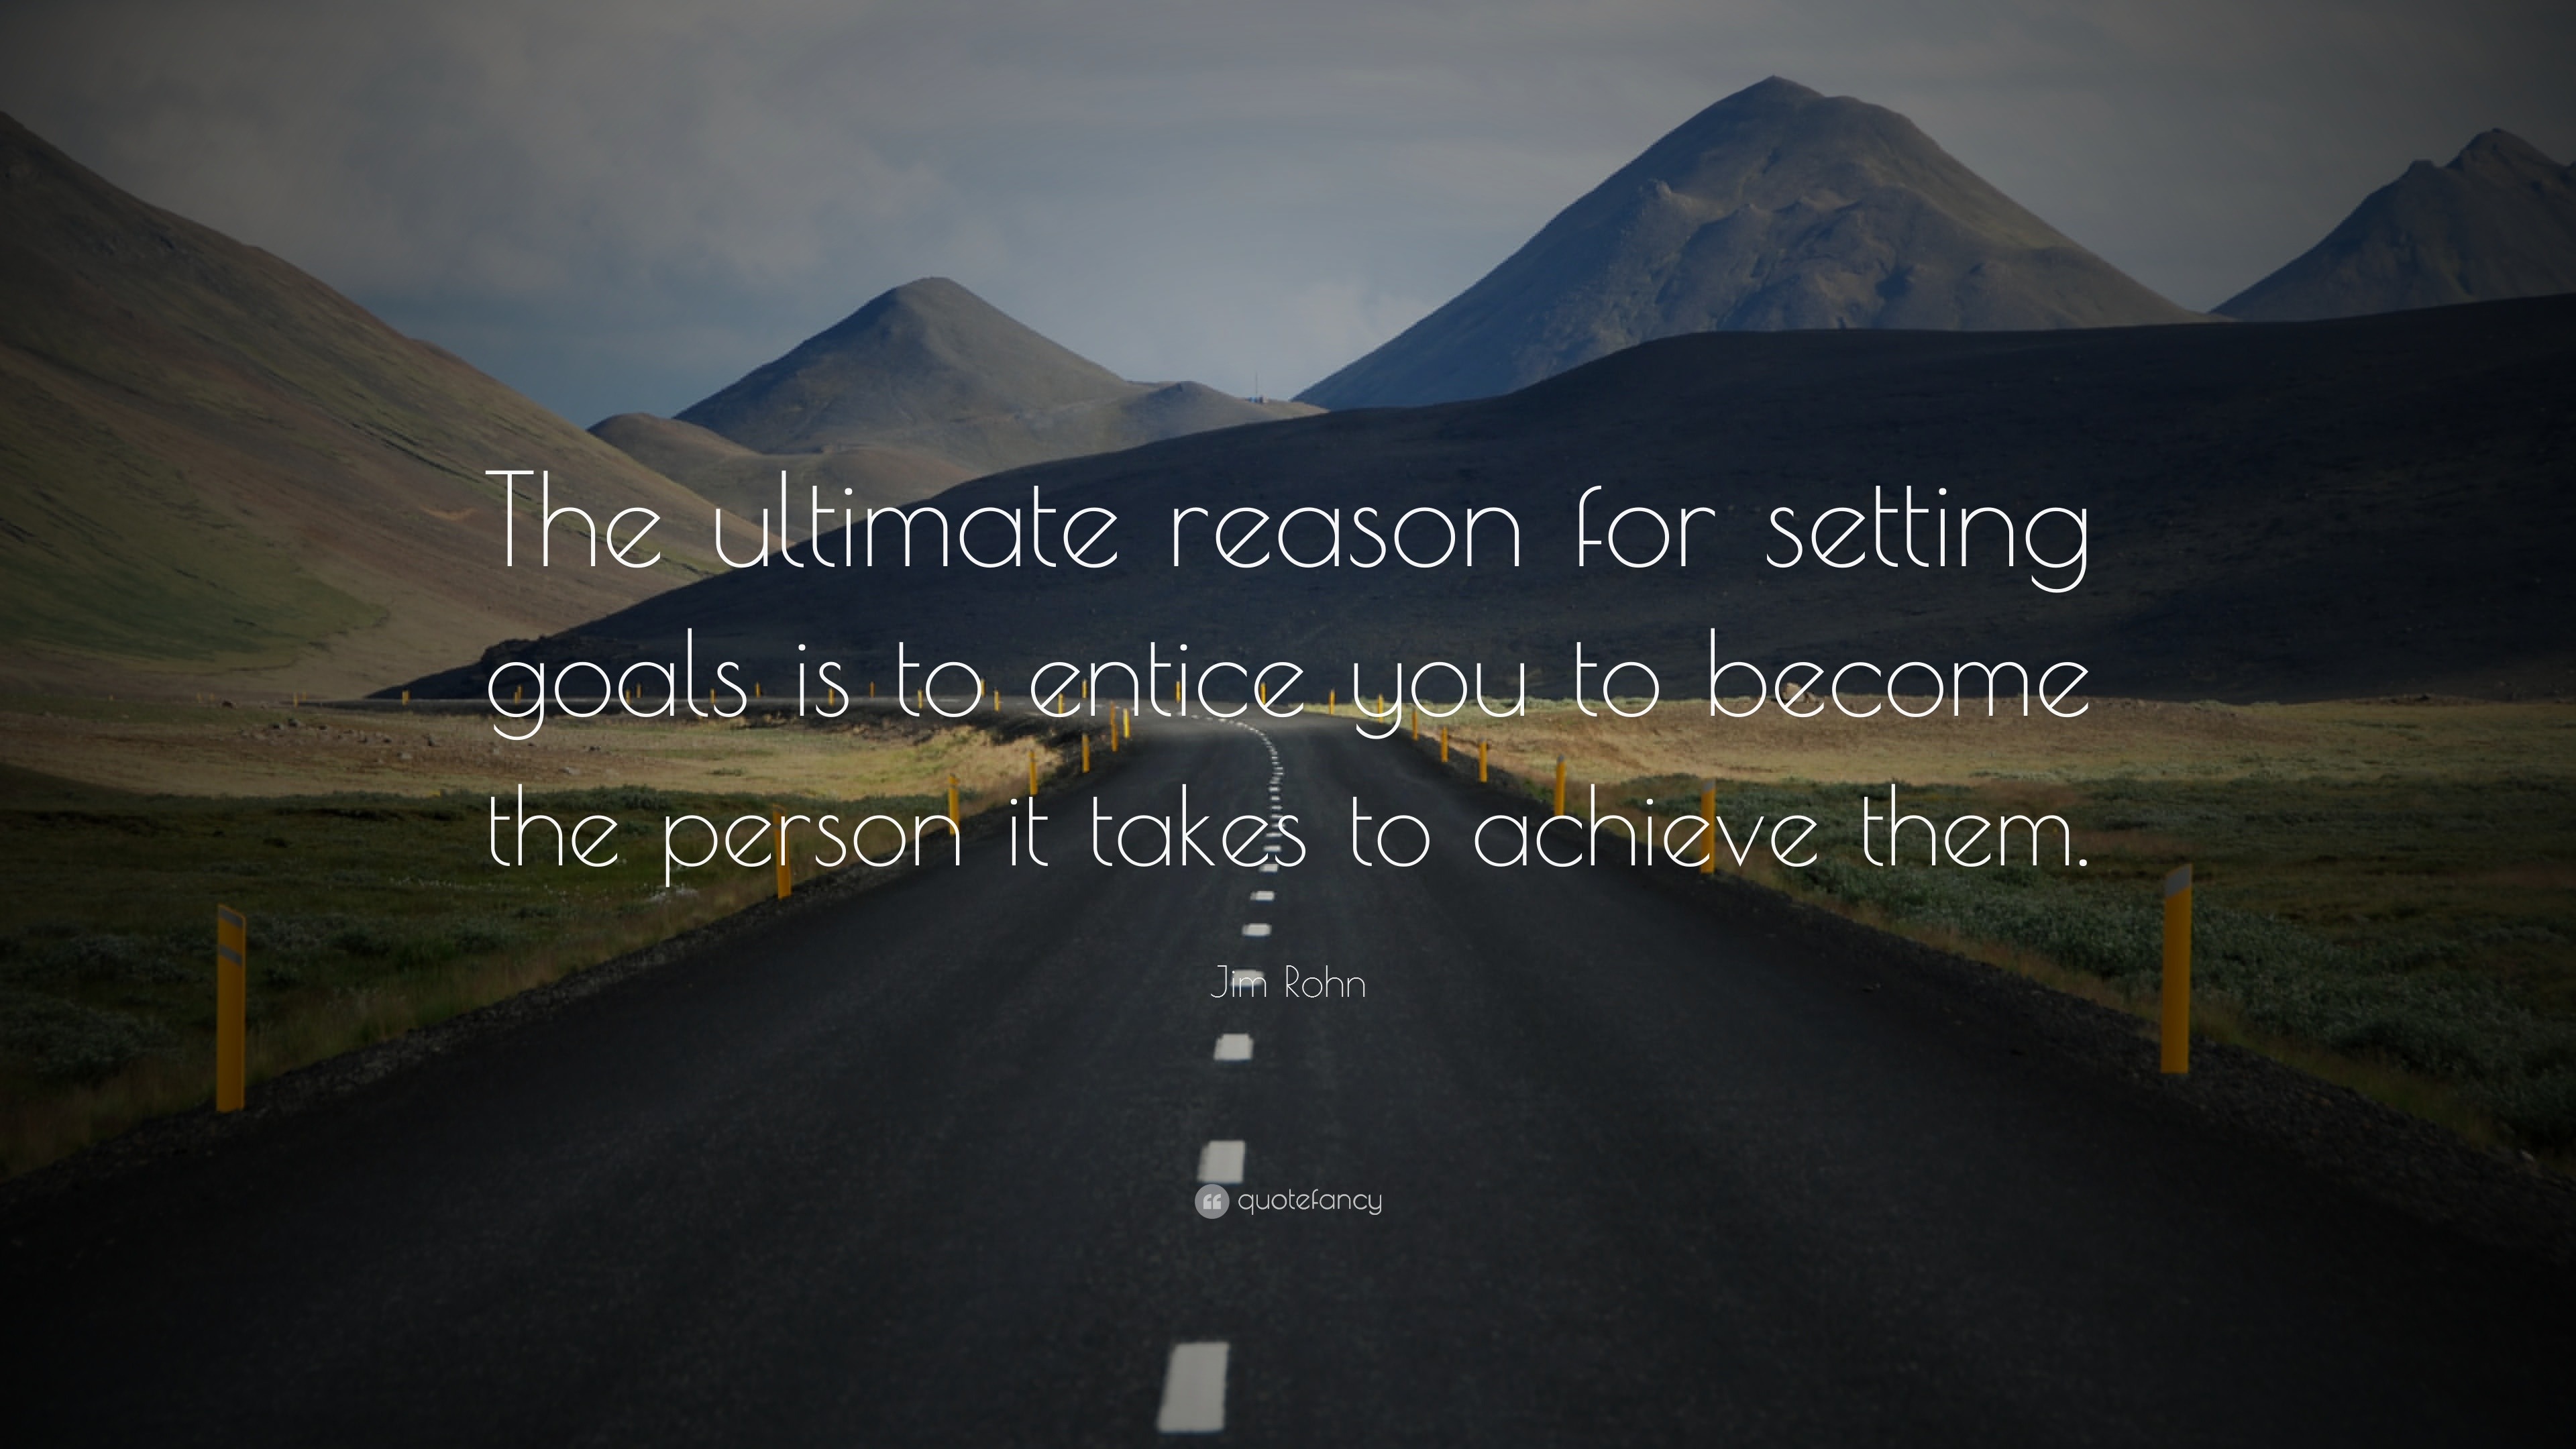 Jim Rohn Quote: “The ultimate reason for setting goals is to entice you